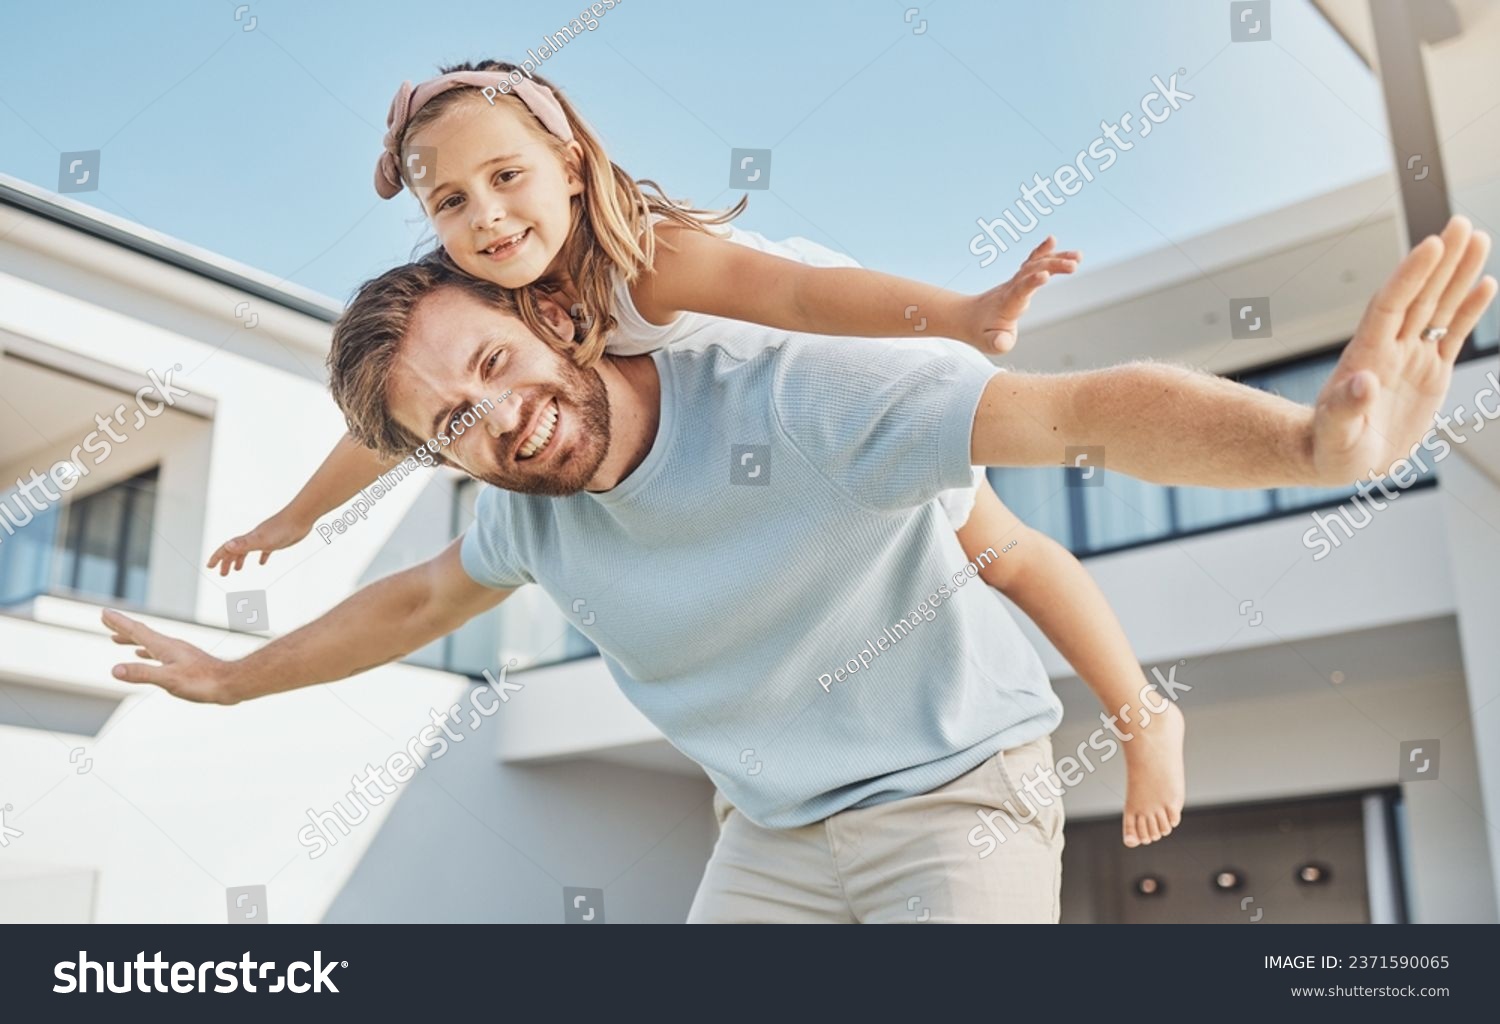 Portrait, girl and flying on back of her dad in a backyard of a home for real estate or property ownership. Love, children or family with a father and daughter in celebration of financial freedom #2371590065